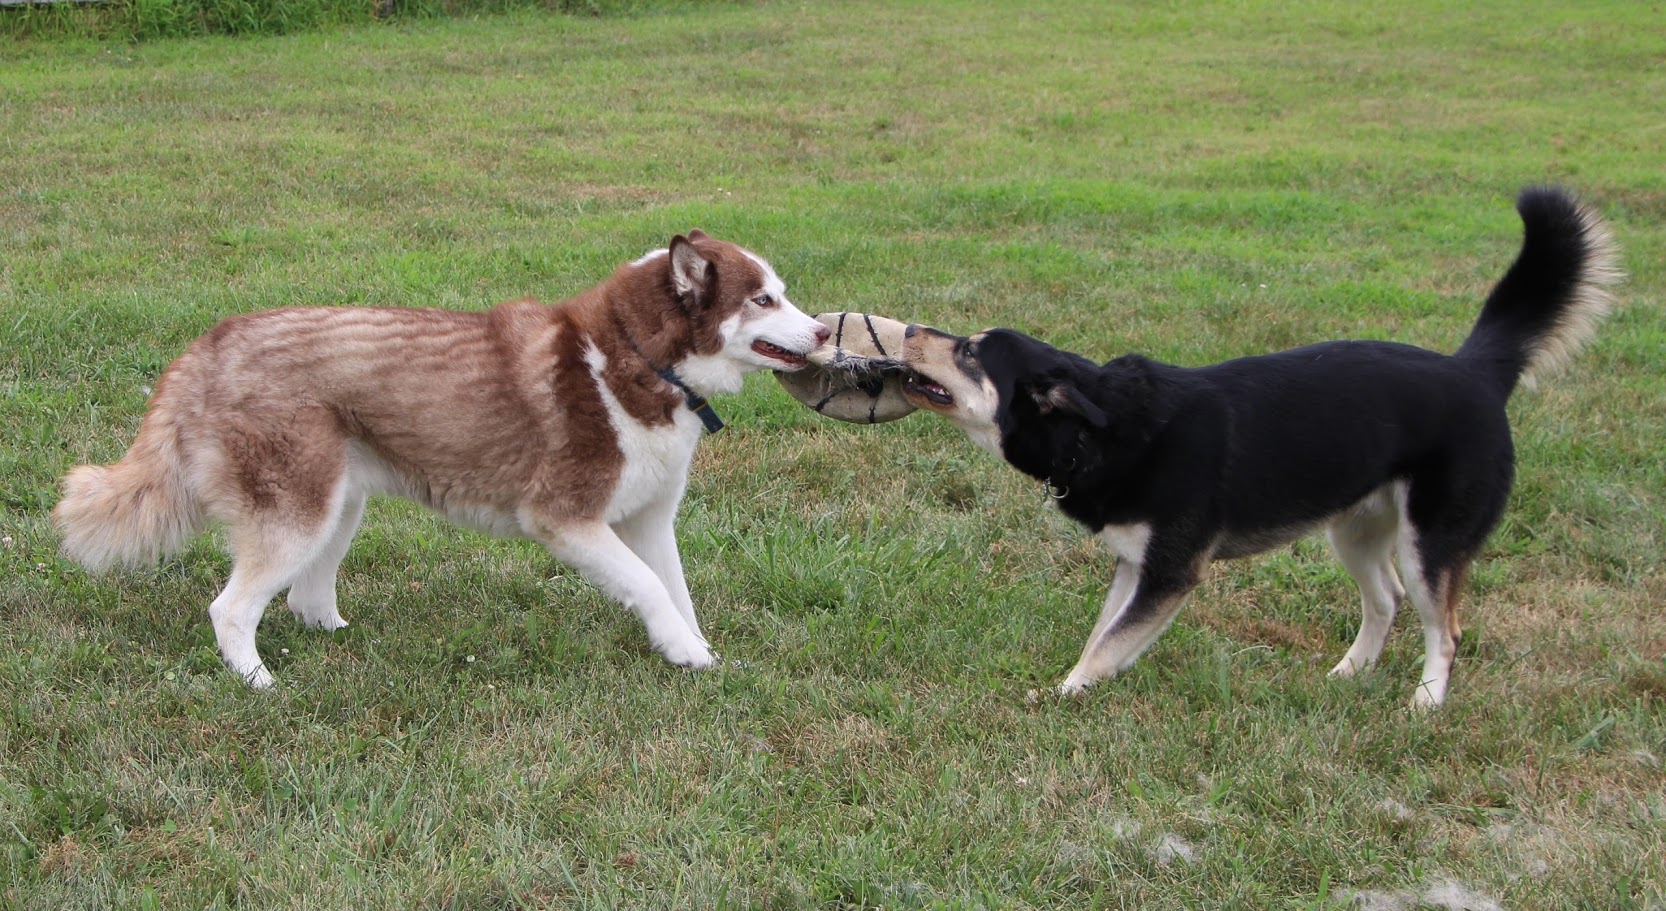 Kato, a Siberian Husky Mix is a playful pup who gets along great with his foster brother.